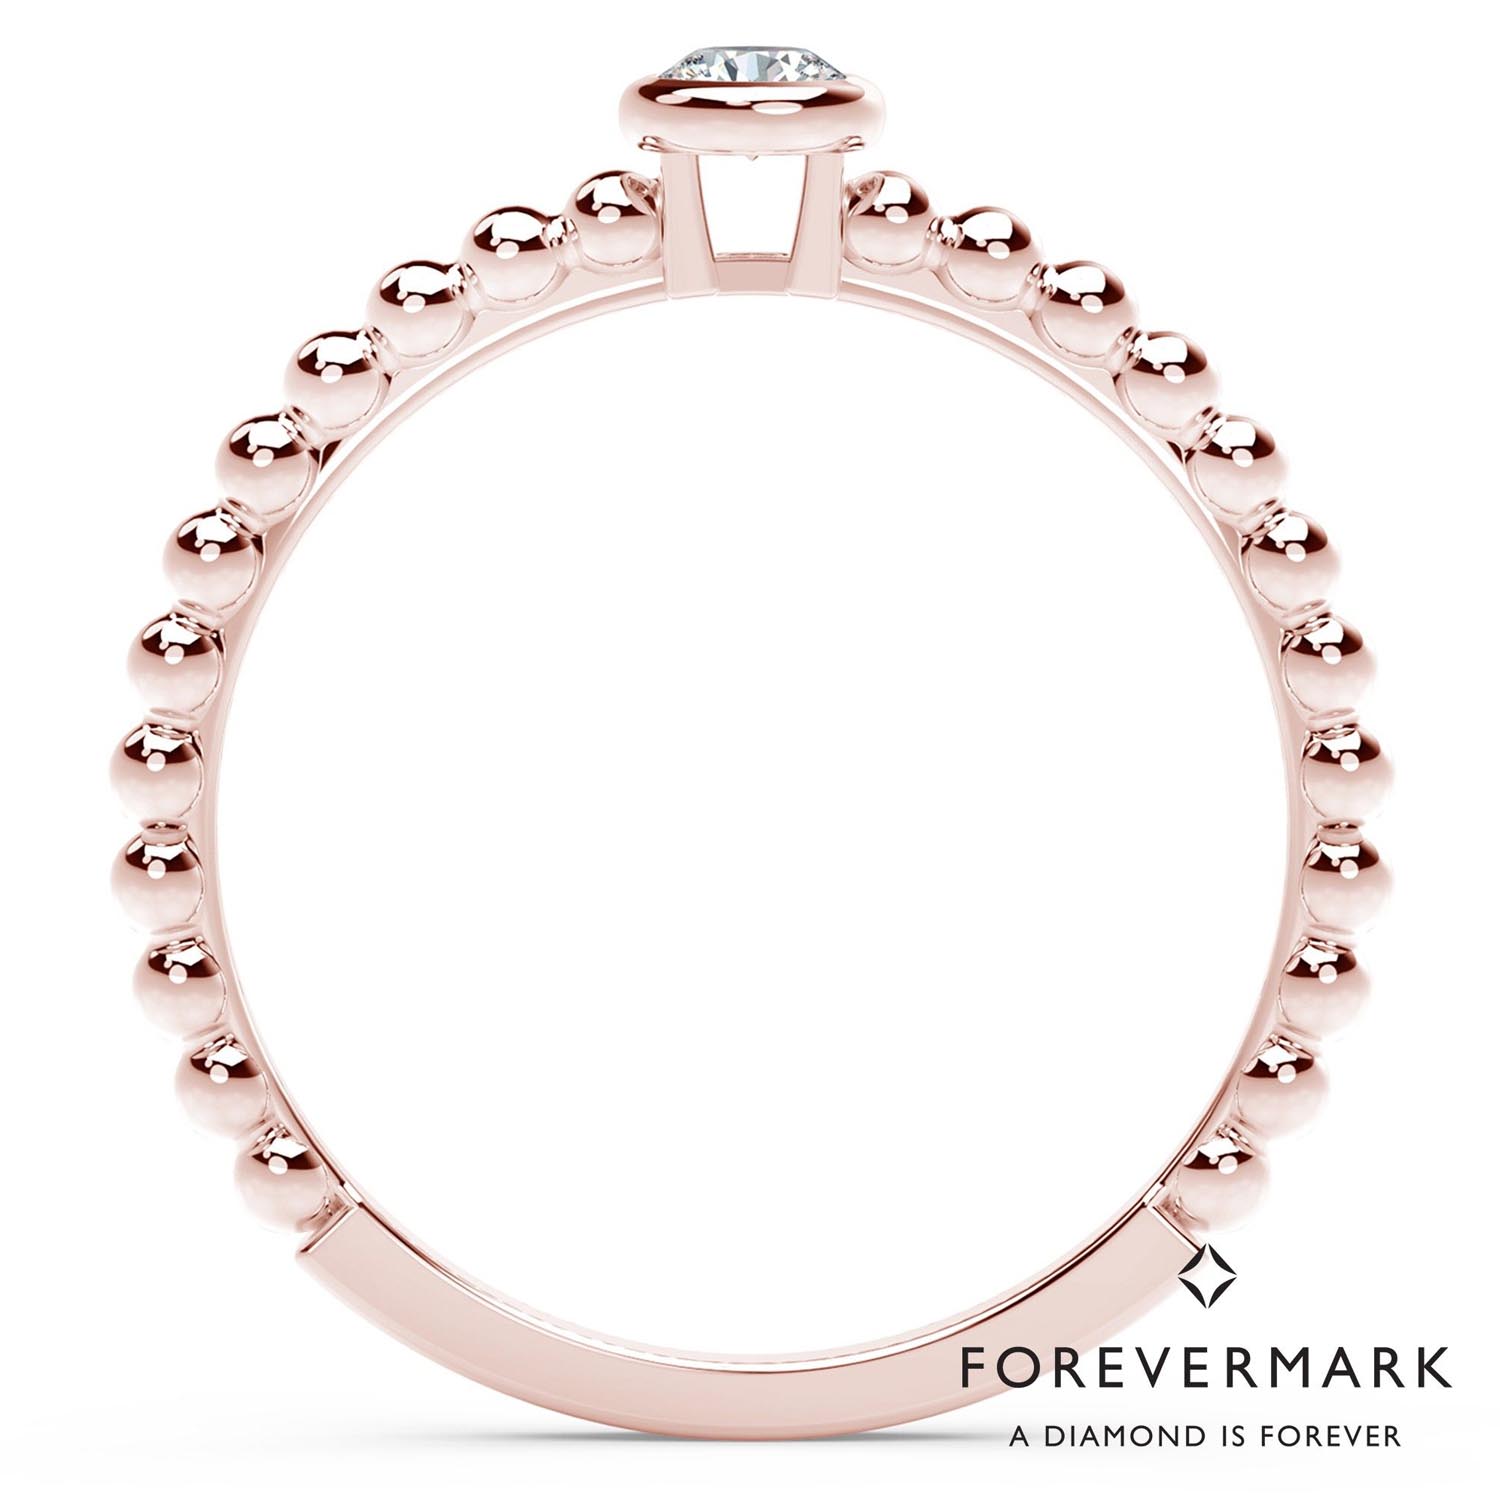 De Beers Forevermark Tribute Collection Diamond Stackable Ring in 18kt Rose Gold (1/7ct tw)